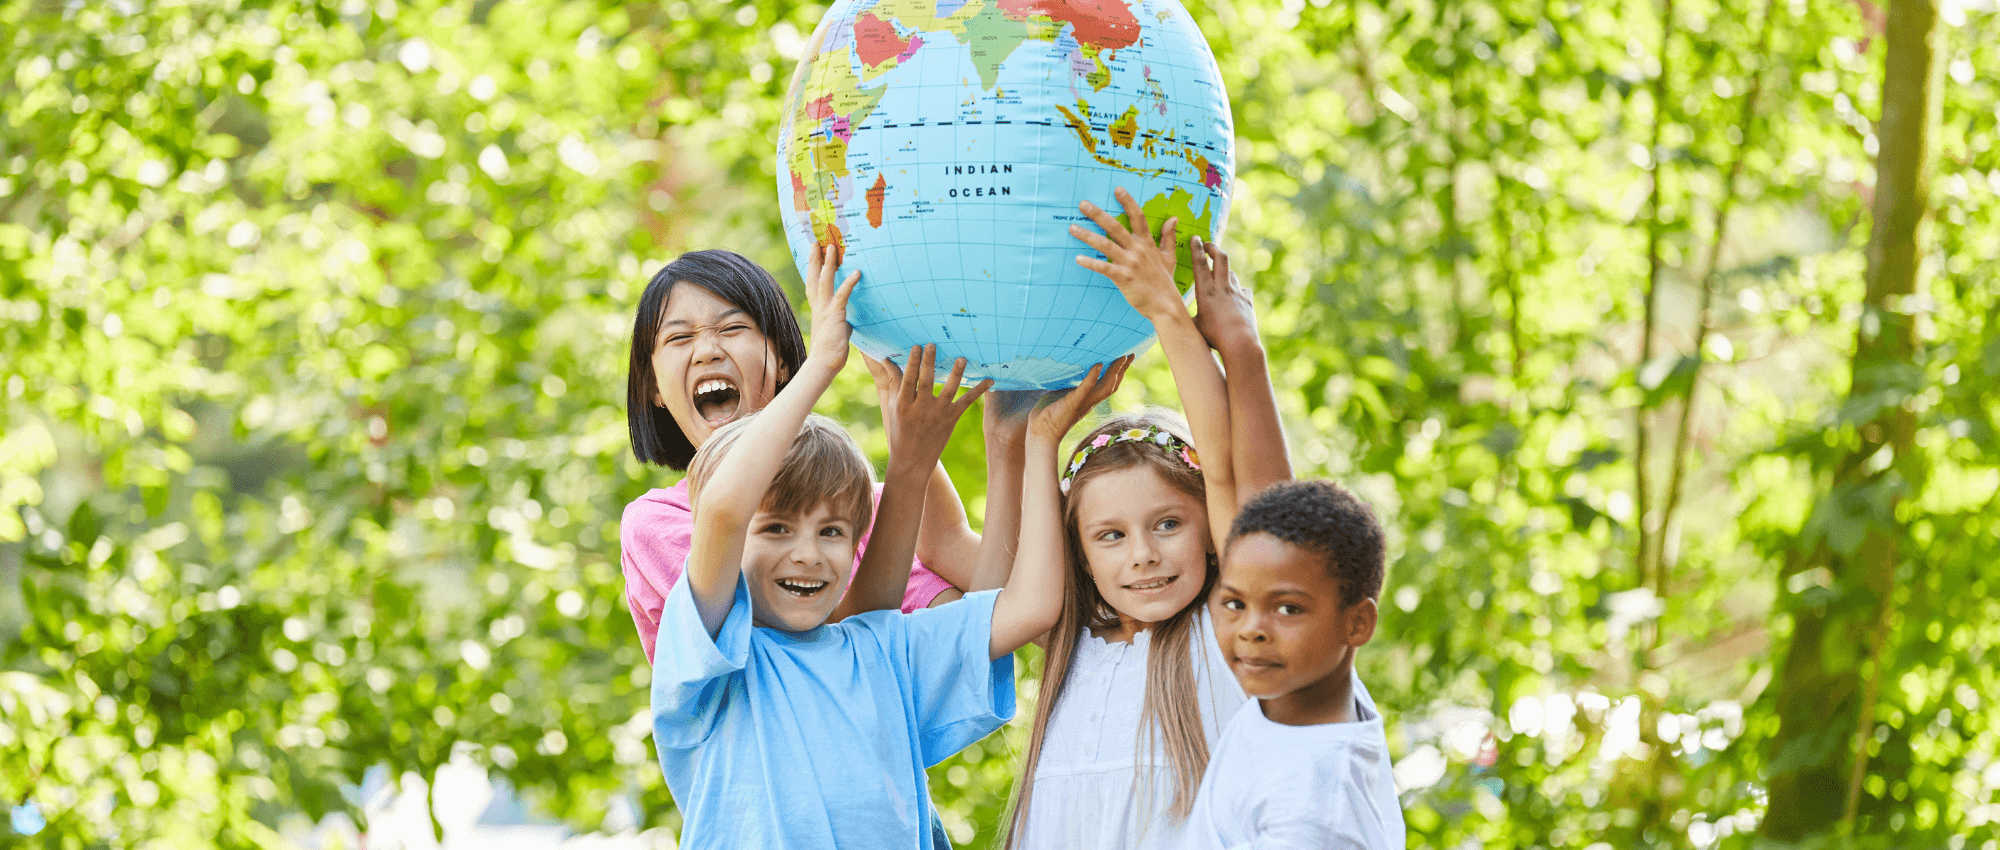 group of children holding a globe